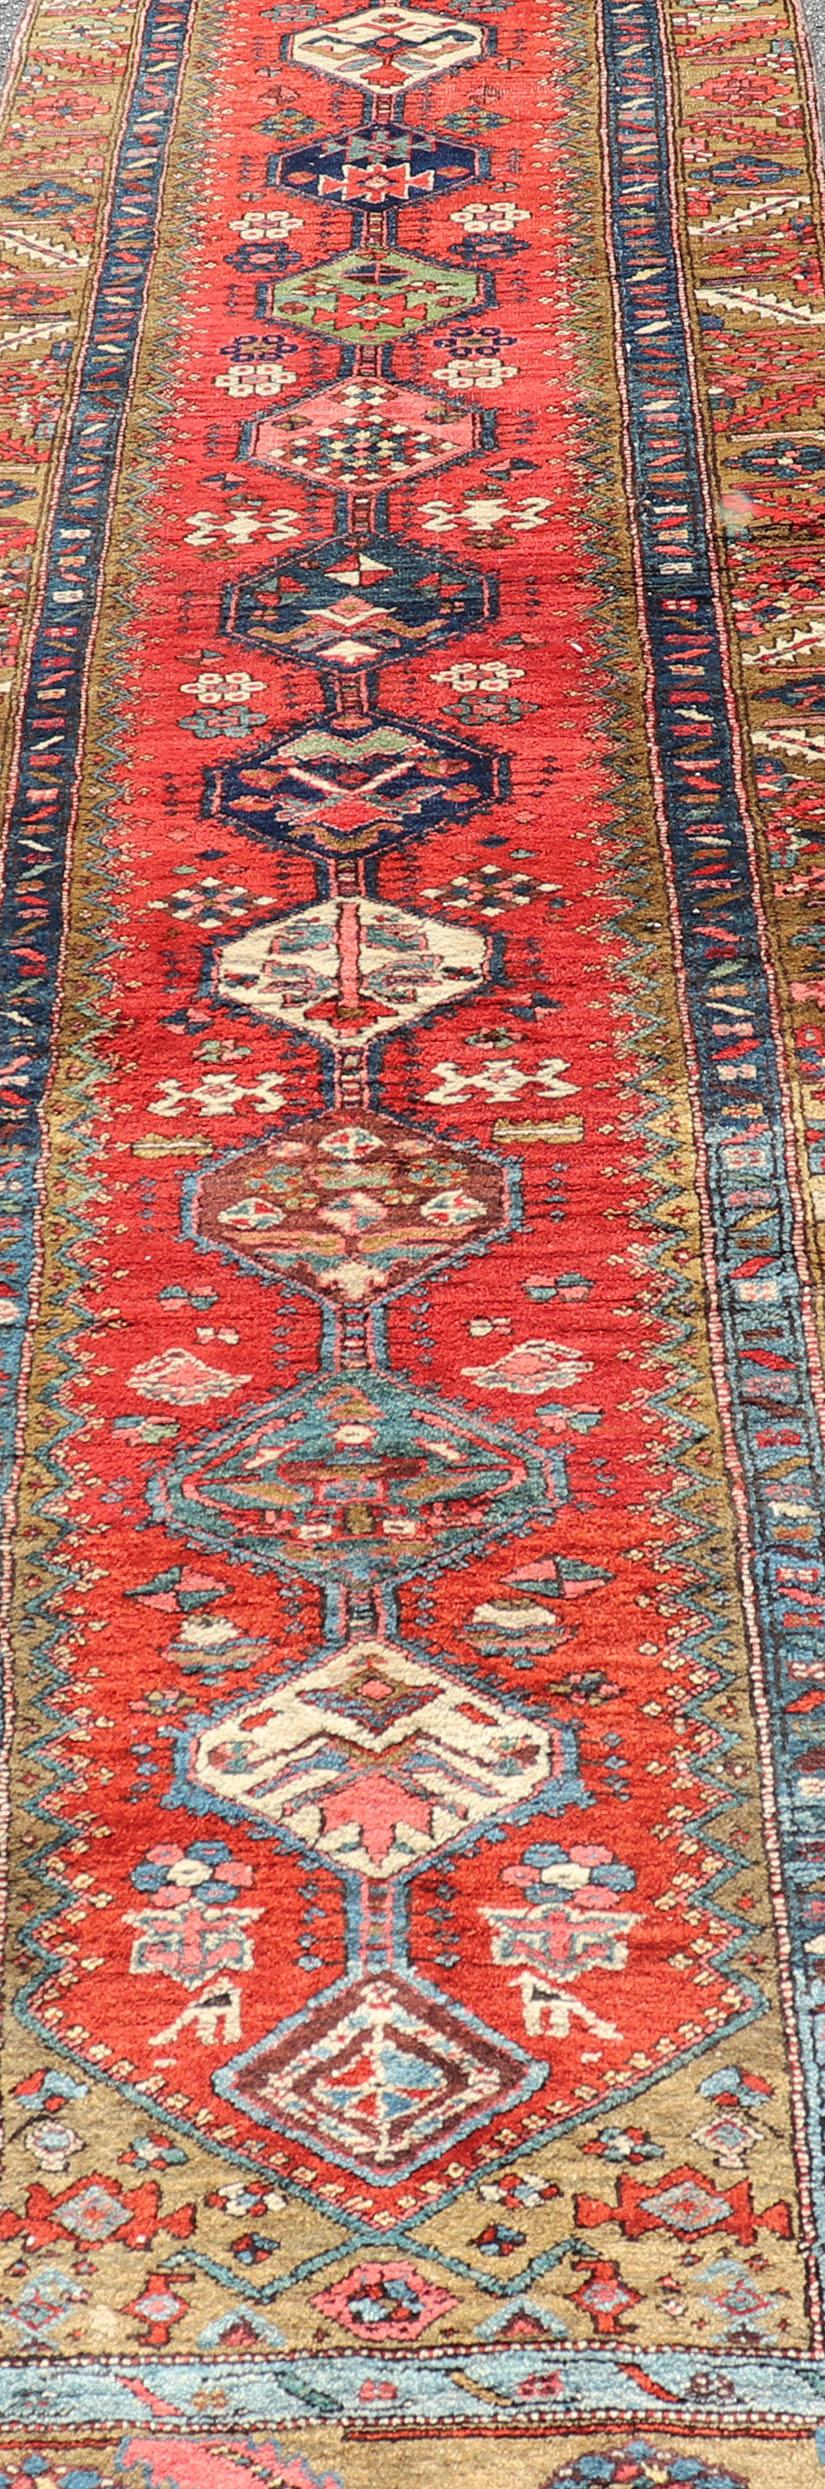 20th Century Antique Persian Heriz Runner in Reds, Blues, Pink, Ivory and Earthy Tones For Sale